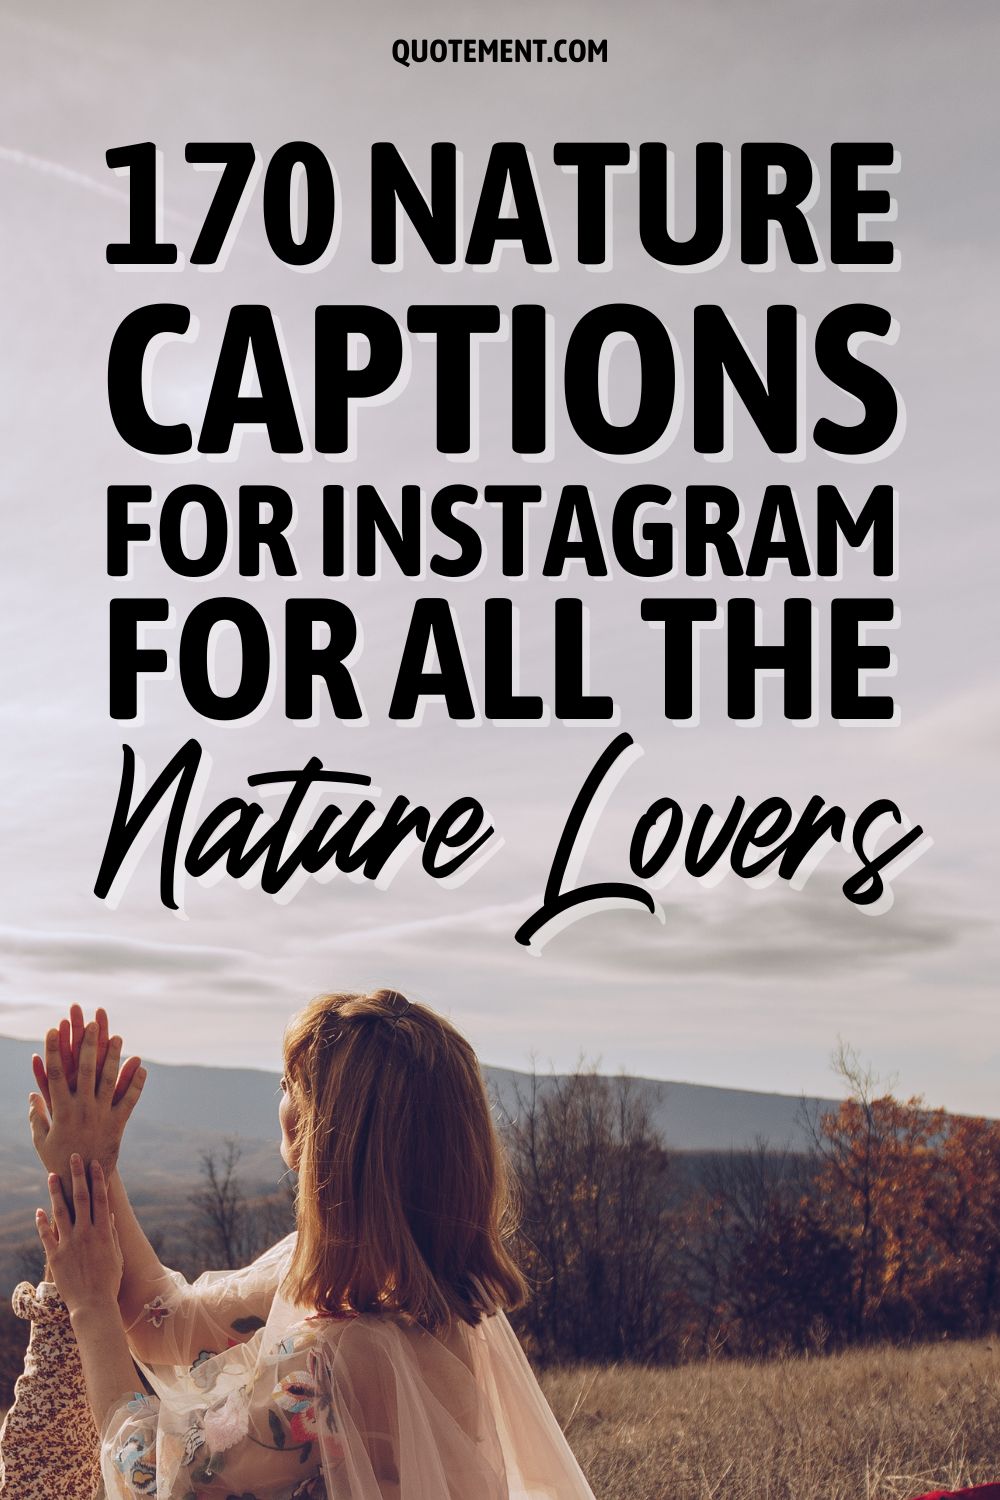 170 Nature Captions For Instagram For All The Nature Lovers
